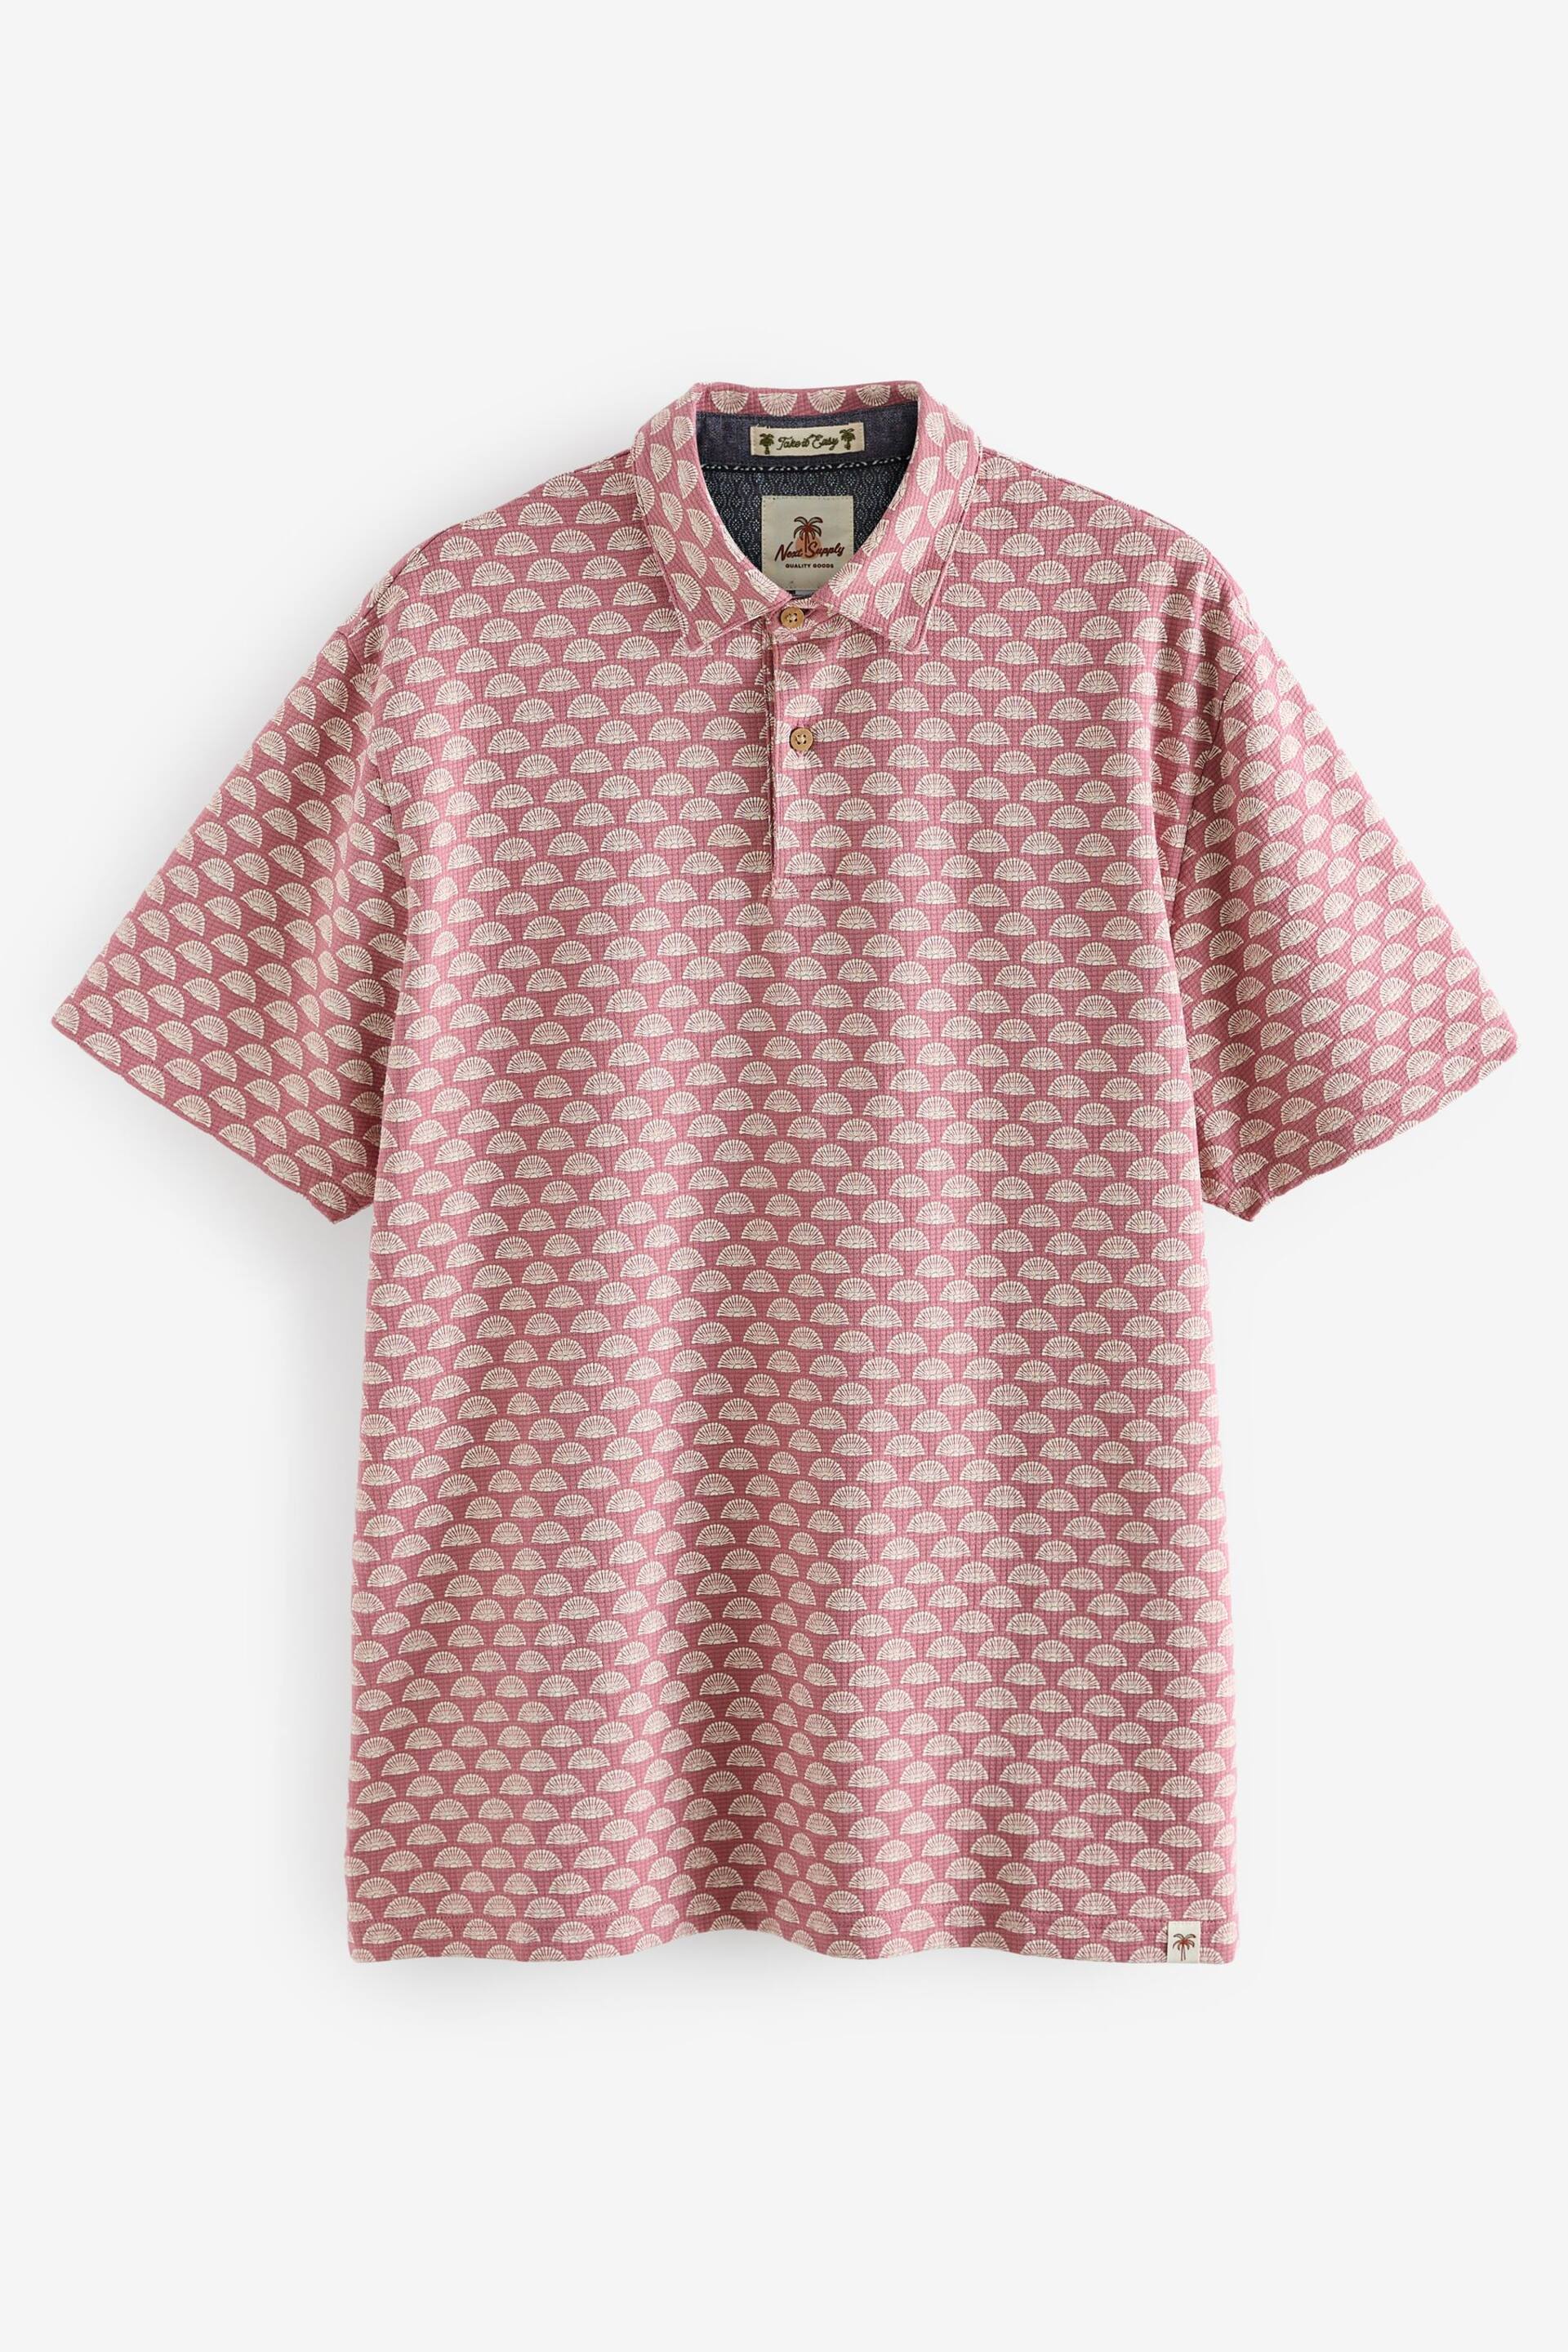 Pink/White Textured Print Polo Shirt - Image 8 of 10